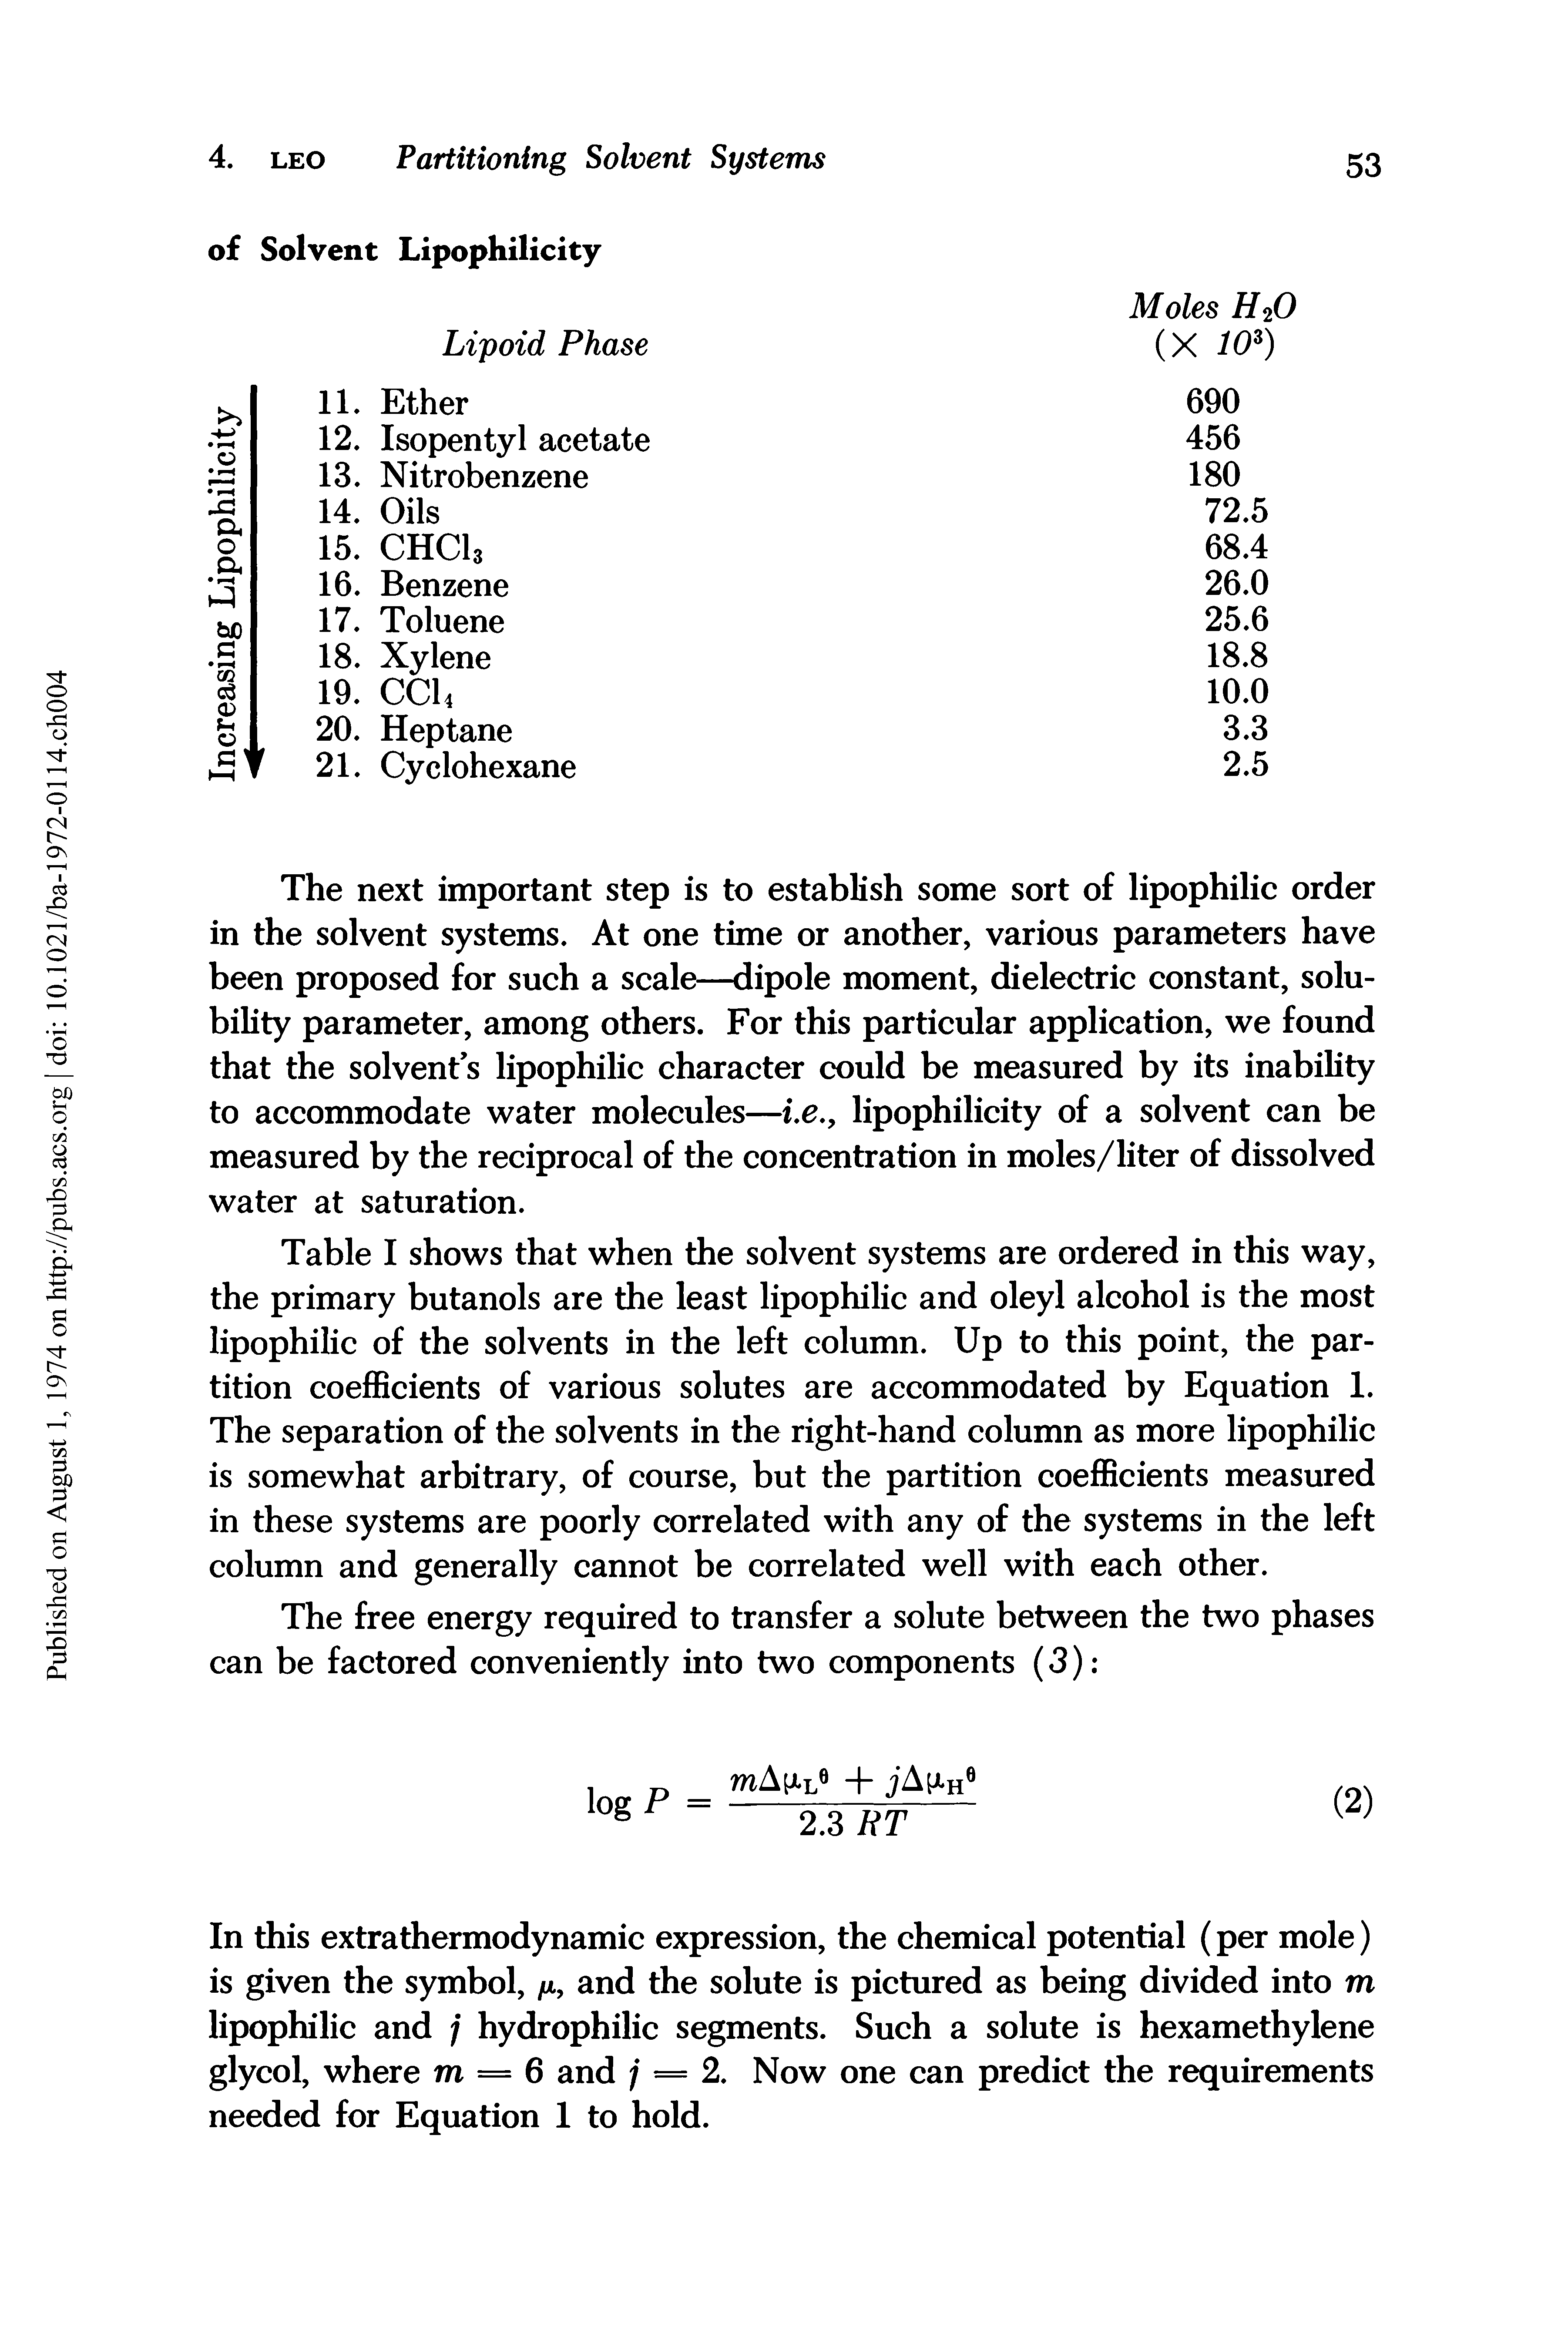 Table I shows that when the solvent systems are ordered in this way, the primary butanols are the least lipophilic and oleyl alcohol is the most lipophilic of the solvents in the left column. Up to this point, the partition coefficients of various solutes are accommodated by Equation 1. The separation of the solvents in the right-hand column as more lipophilic is somewhat arbitrary, of course, but the partition coefficients measured in these systems are poorly correlated with any of the systems in the left column and generally cannot be correlated well with each other.